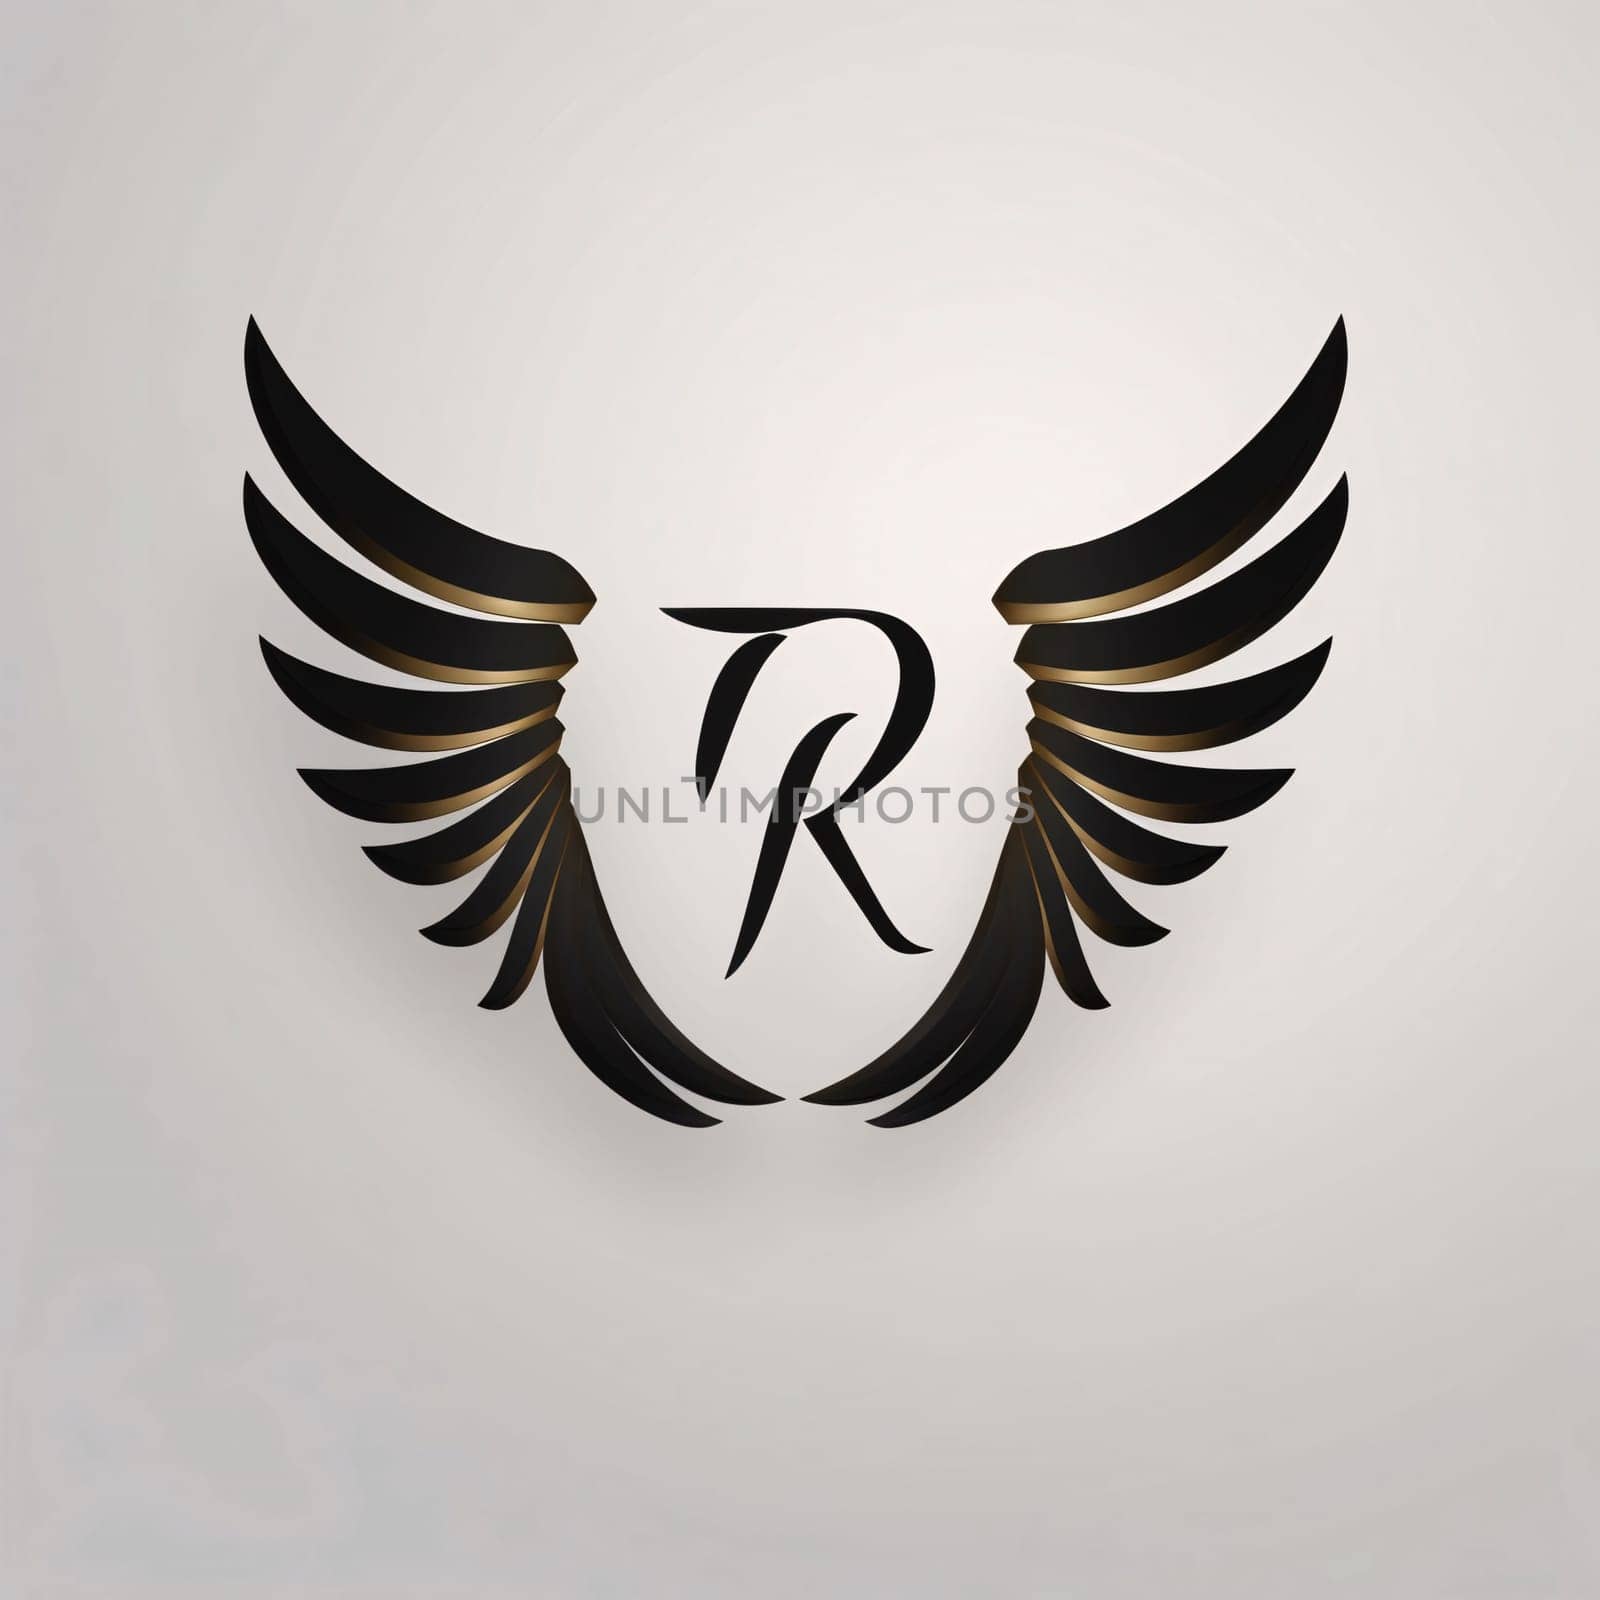 Graphic alphabet letters: Letter R with wings design template elements. Elegant luxury symbol for corporate business identity.